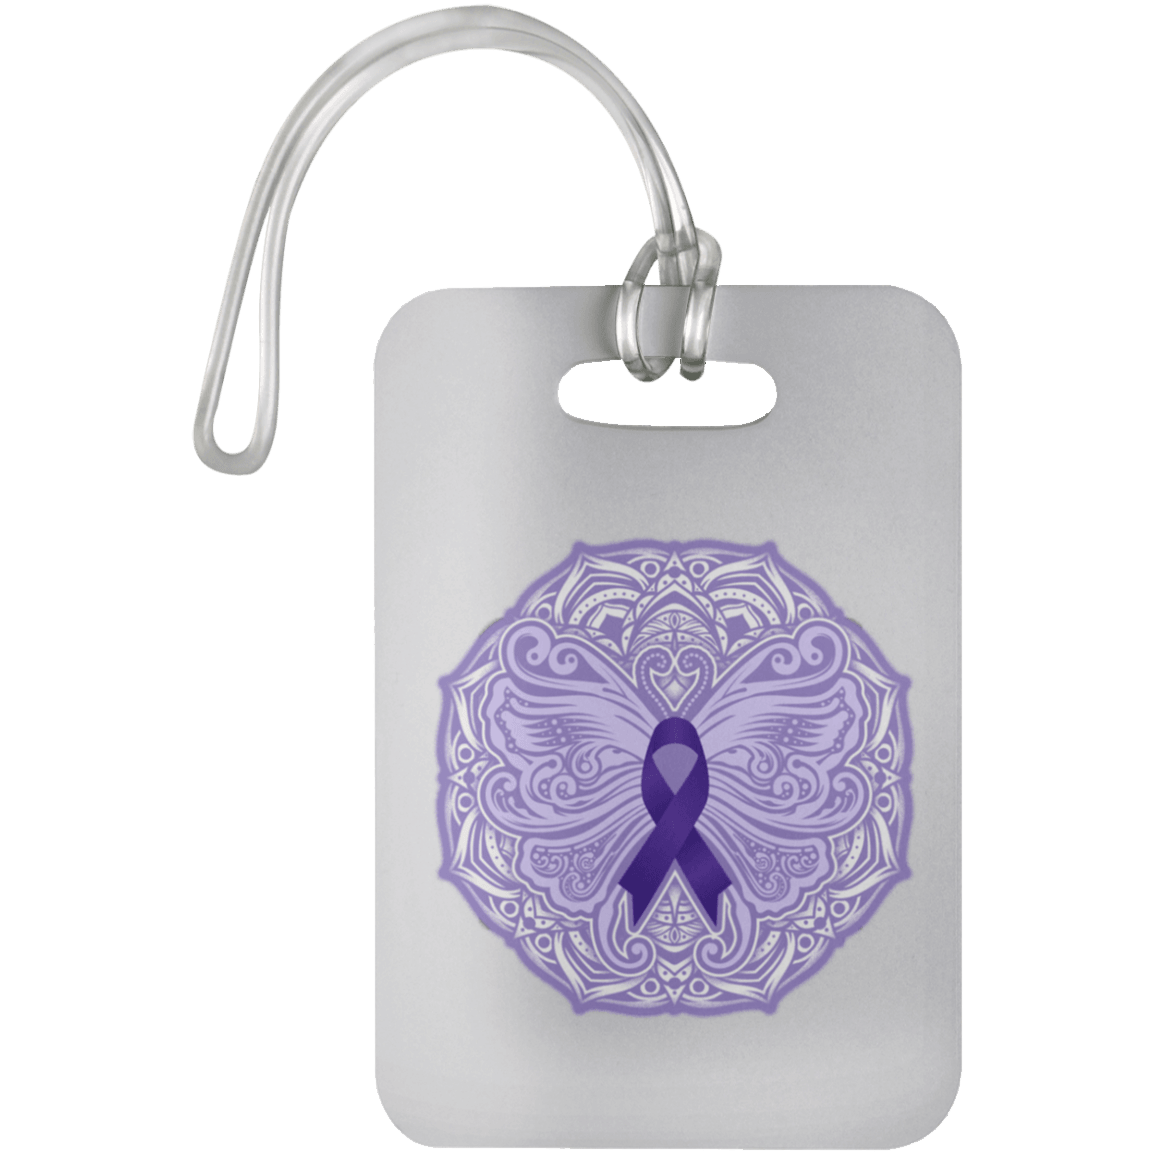 Designs by MyUtopia Shout Out:Epilepsy Awareness Butterfly Luggage Bag Tag,White / One Size,Luggage Tags